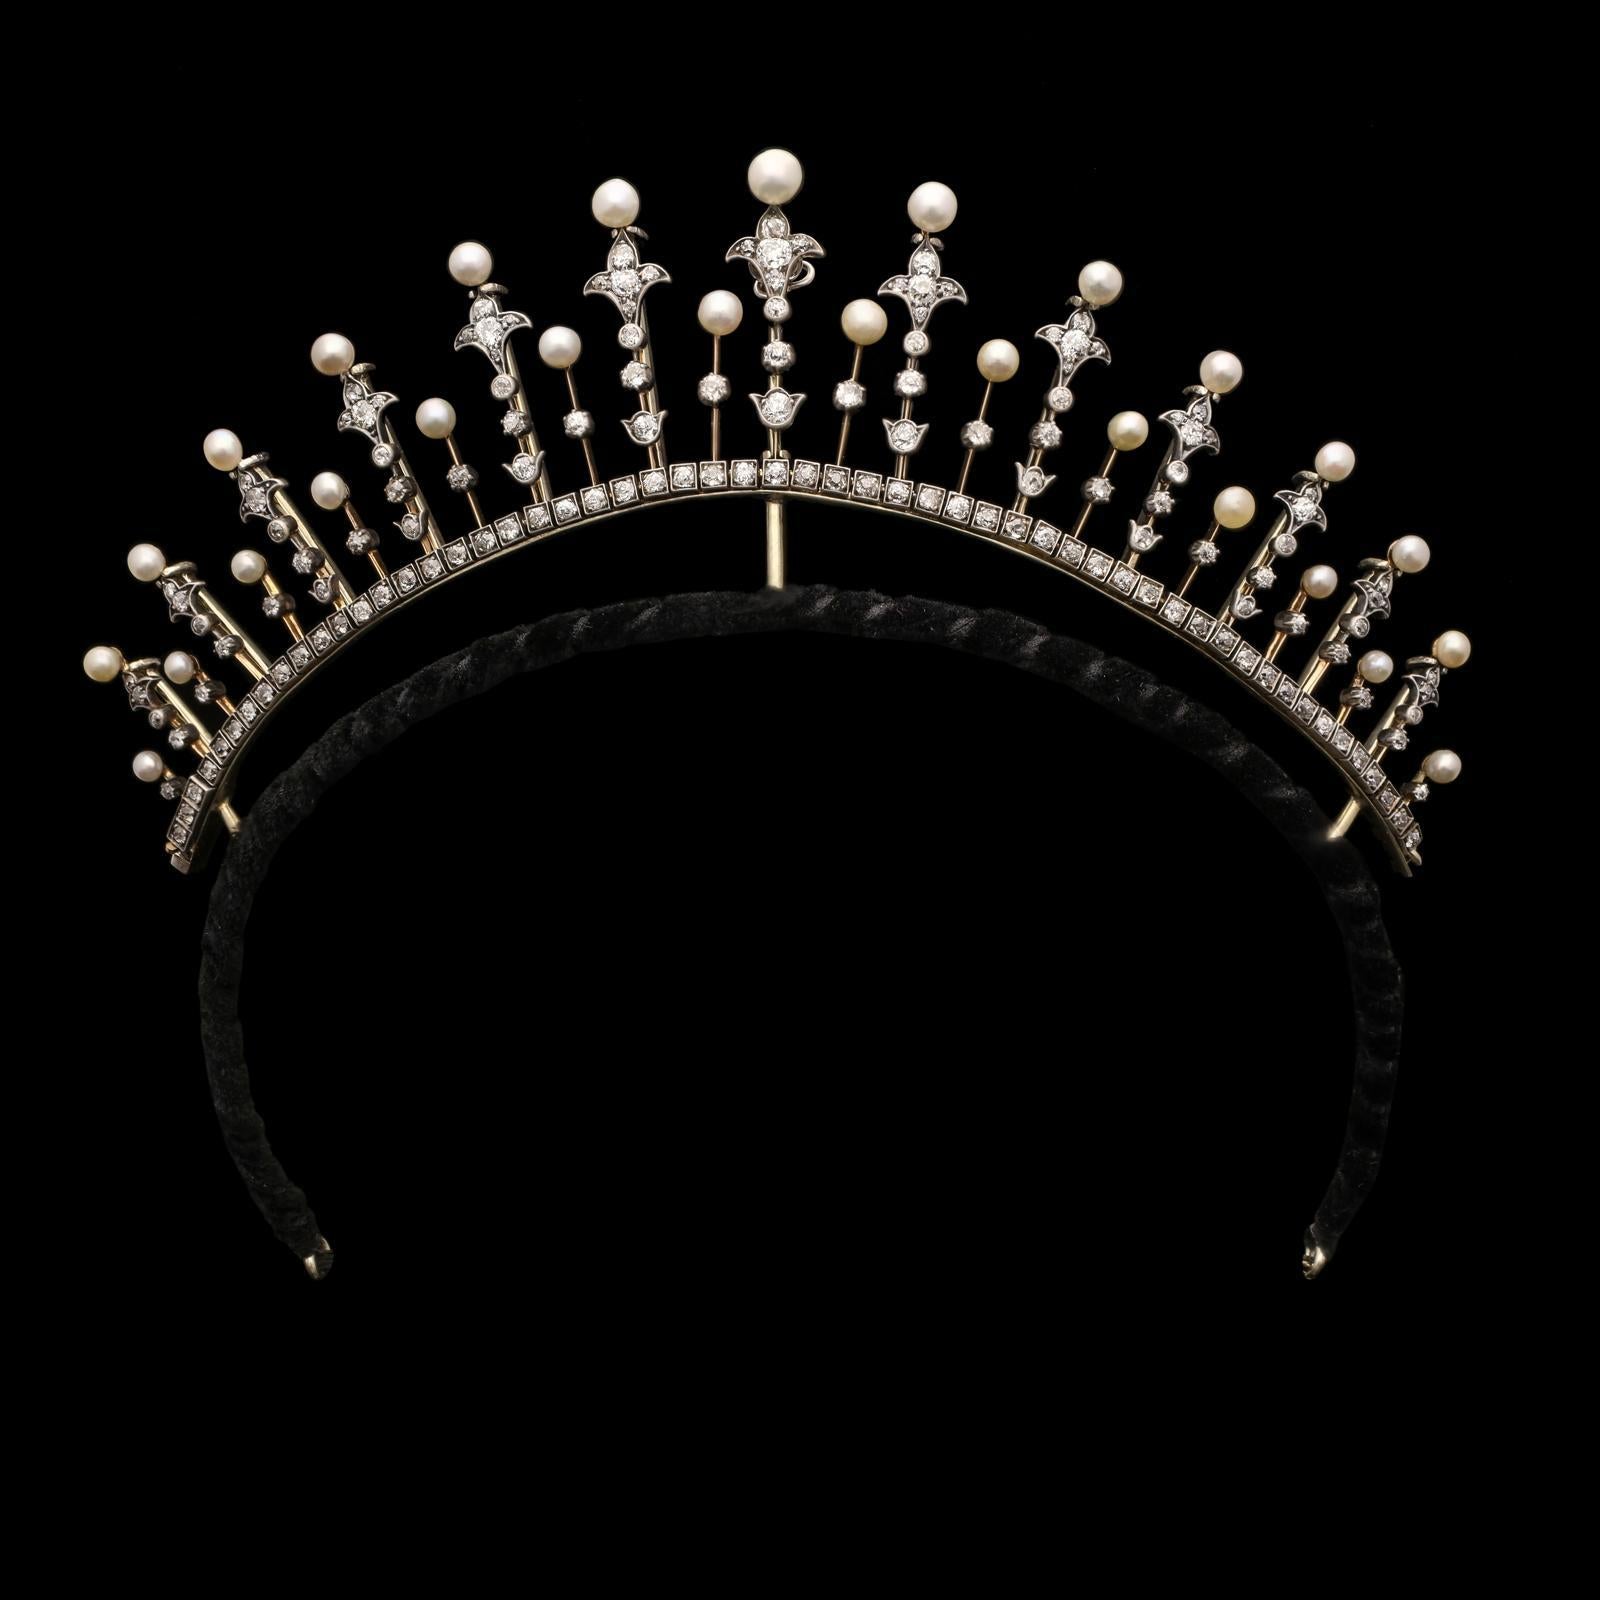  A beautiful Victorian diamond and pearl tiara c.1890, designed as a graduated fringe of knife-edge spires set with old cut diamonds and topped with natural cream round pearls, the dominant spires feature a lily motif at the base with a single